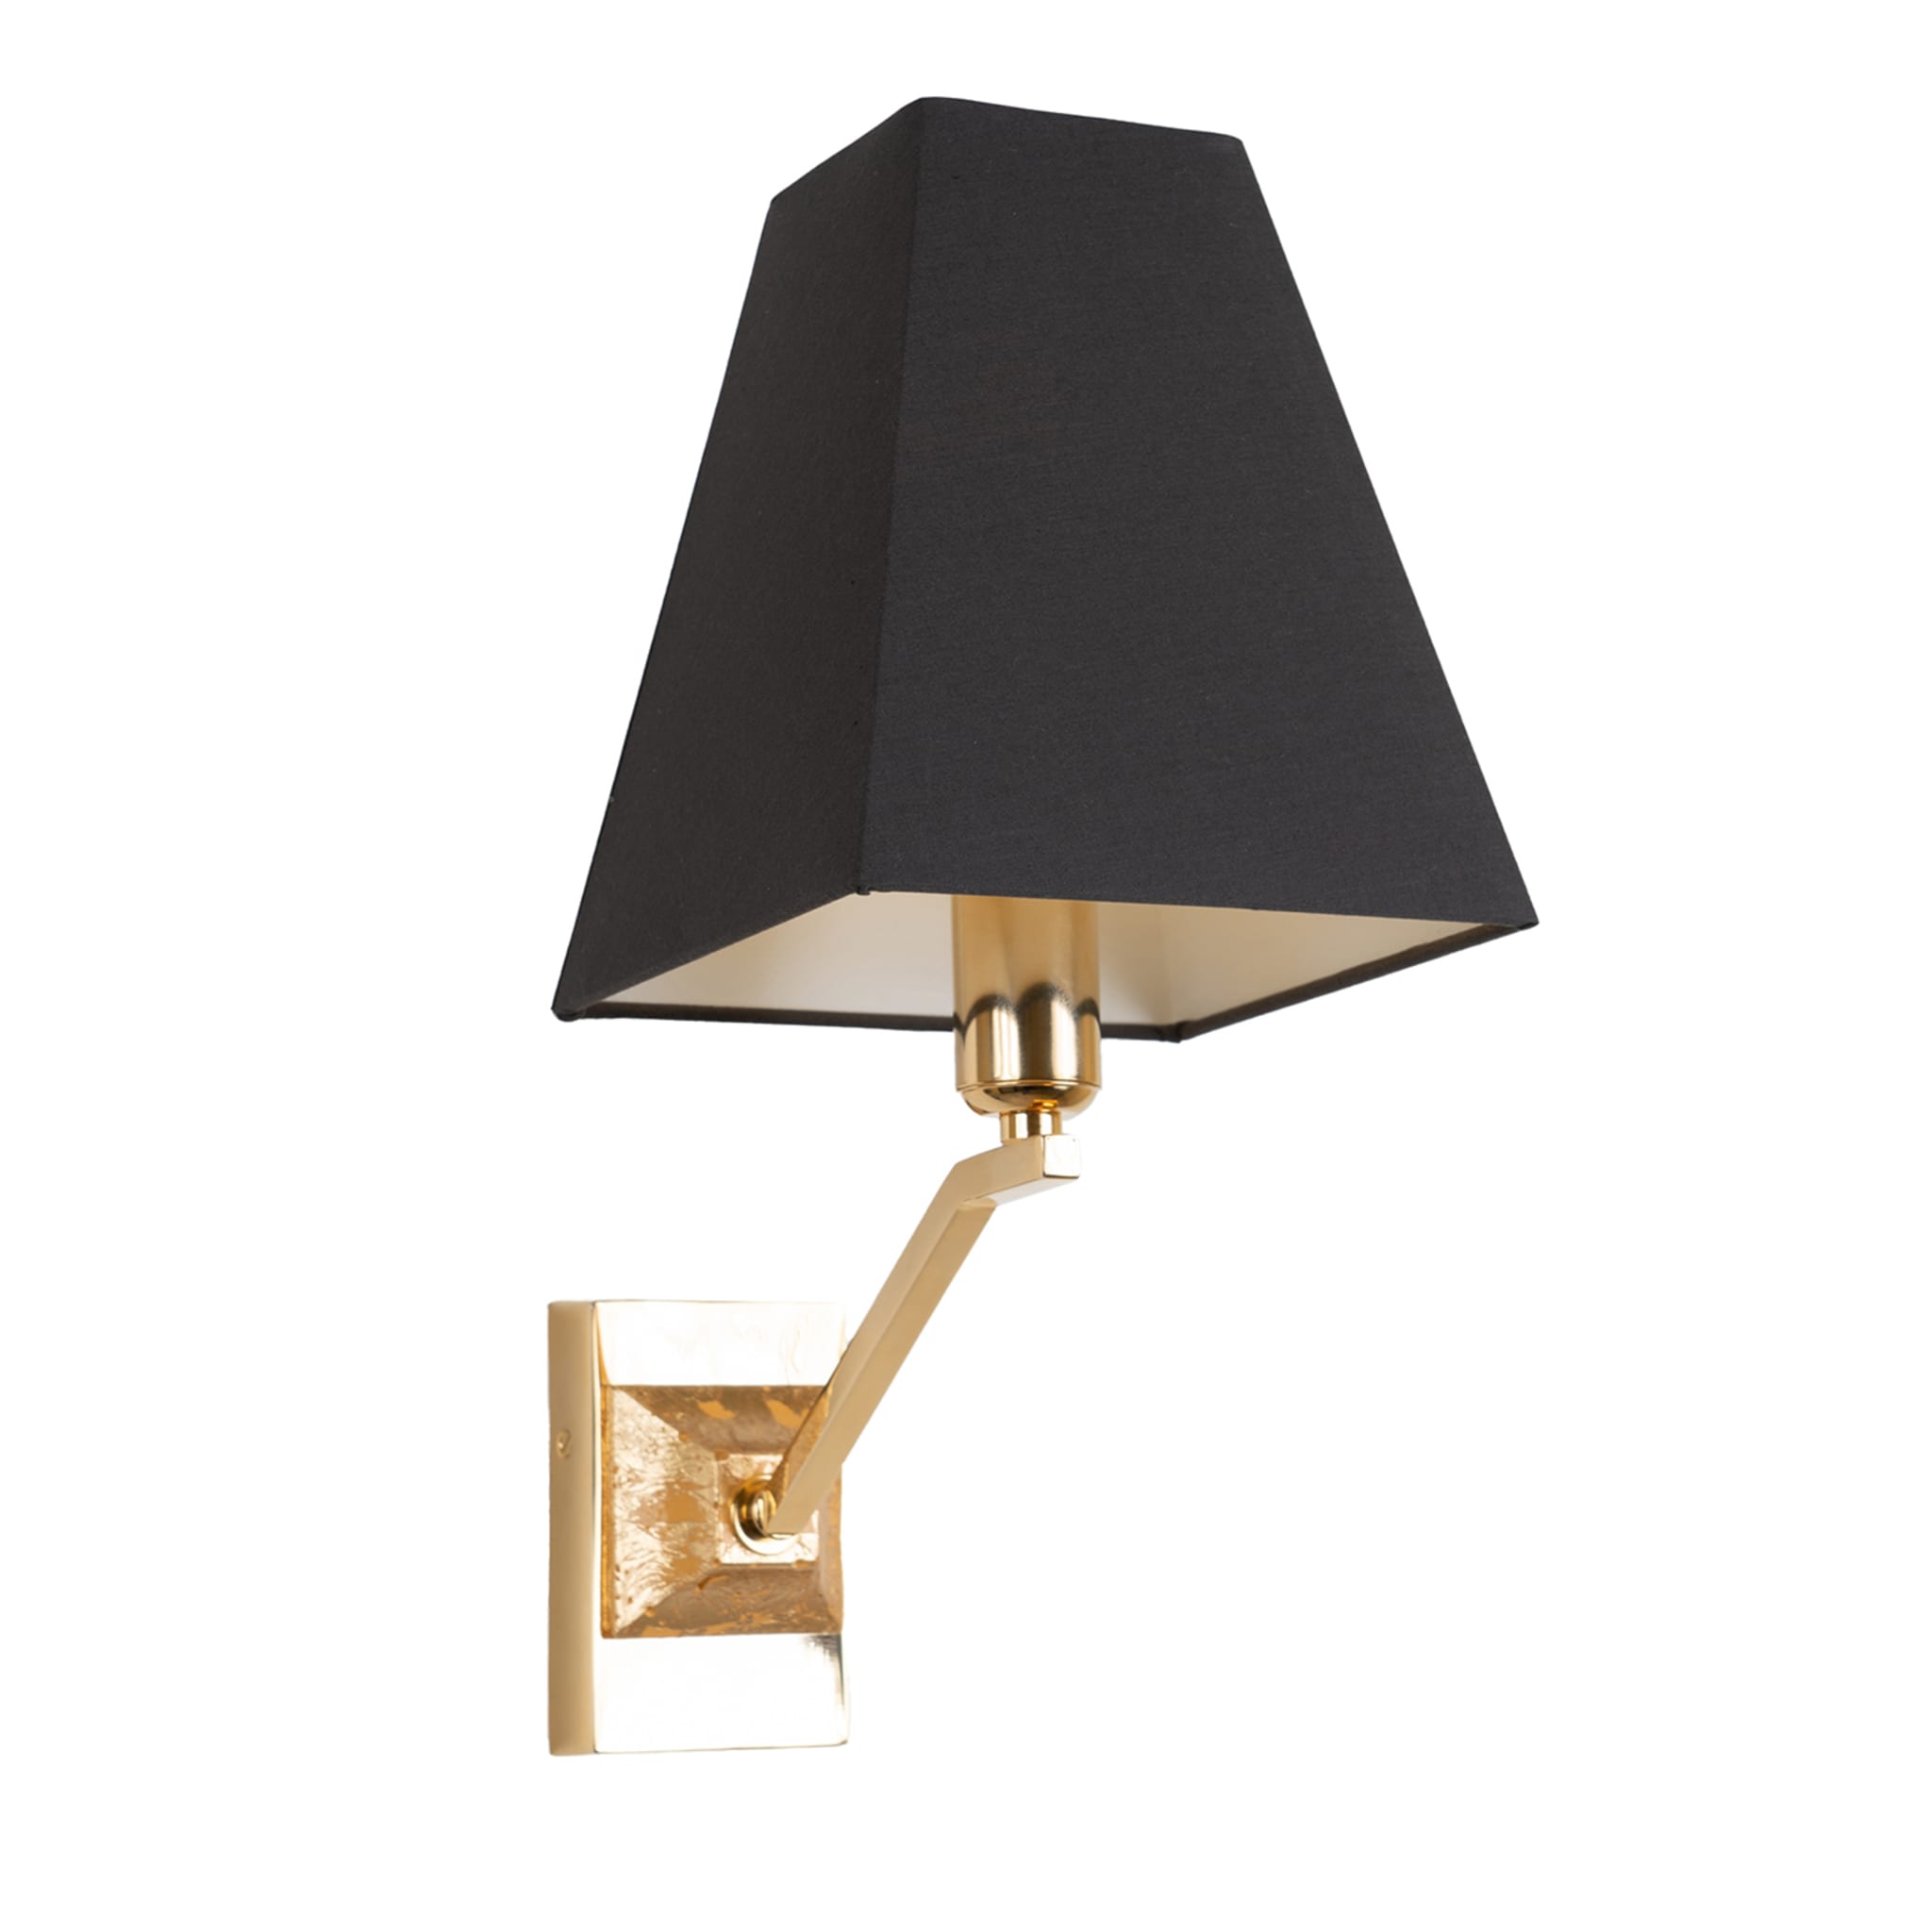 Anthracite-Gray & Golden Sconce - Main view